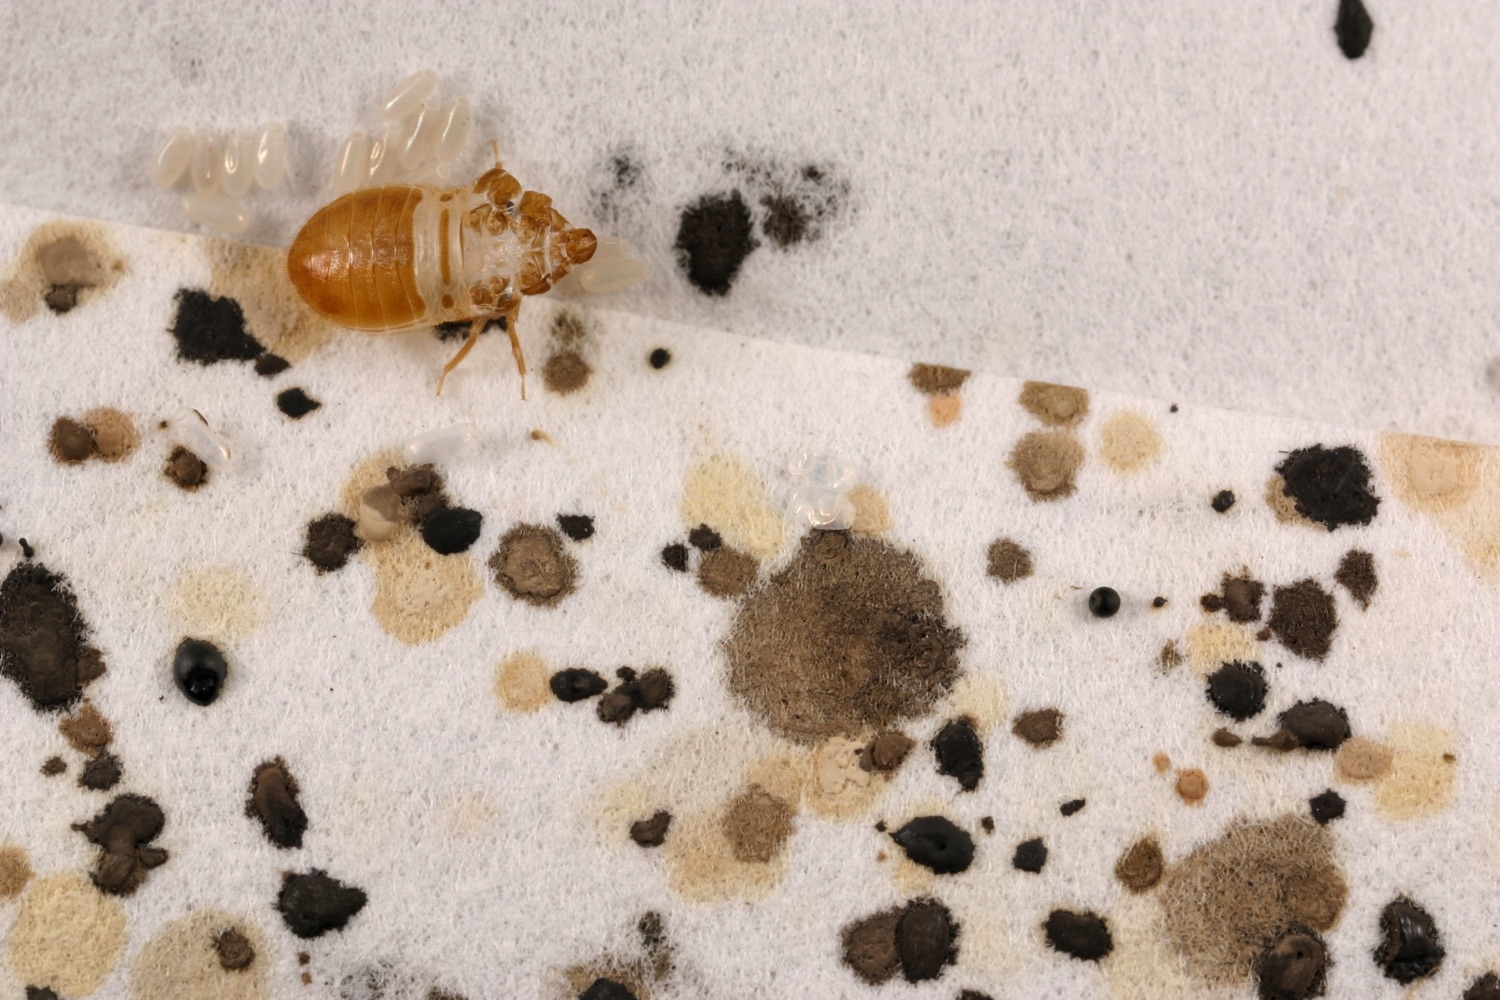 How Long Does Silica Gel Last Against Bed Bugs?